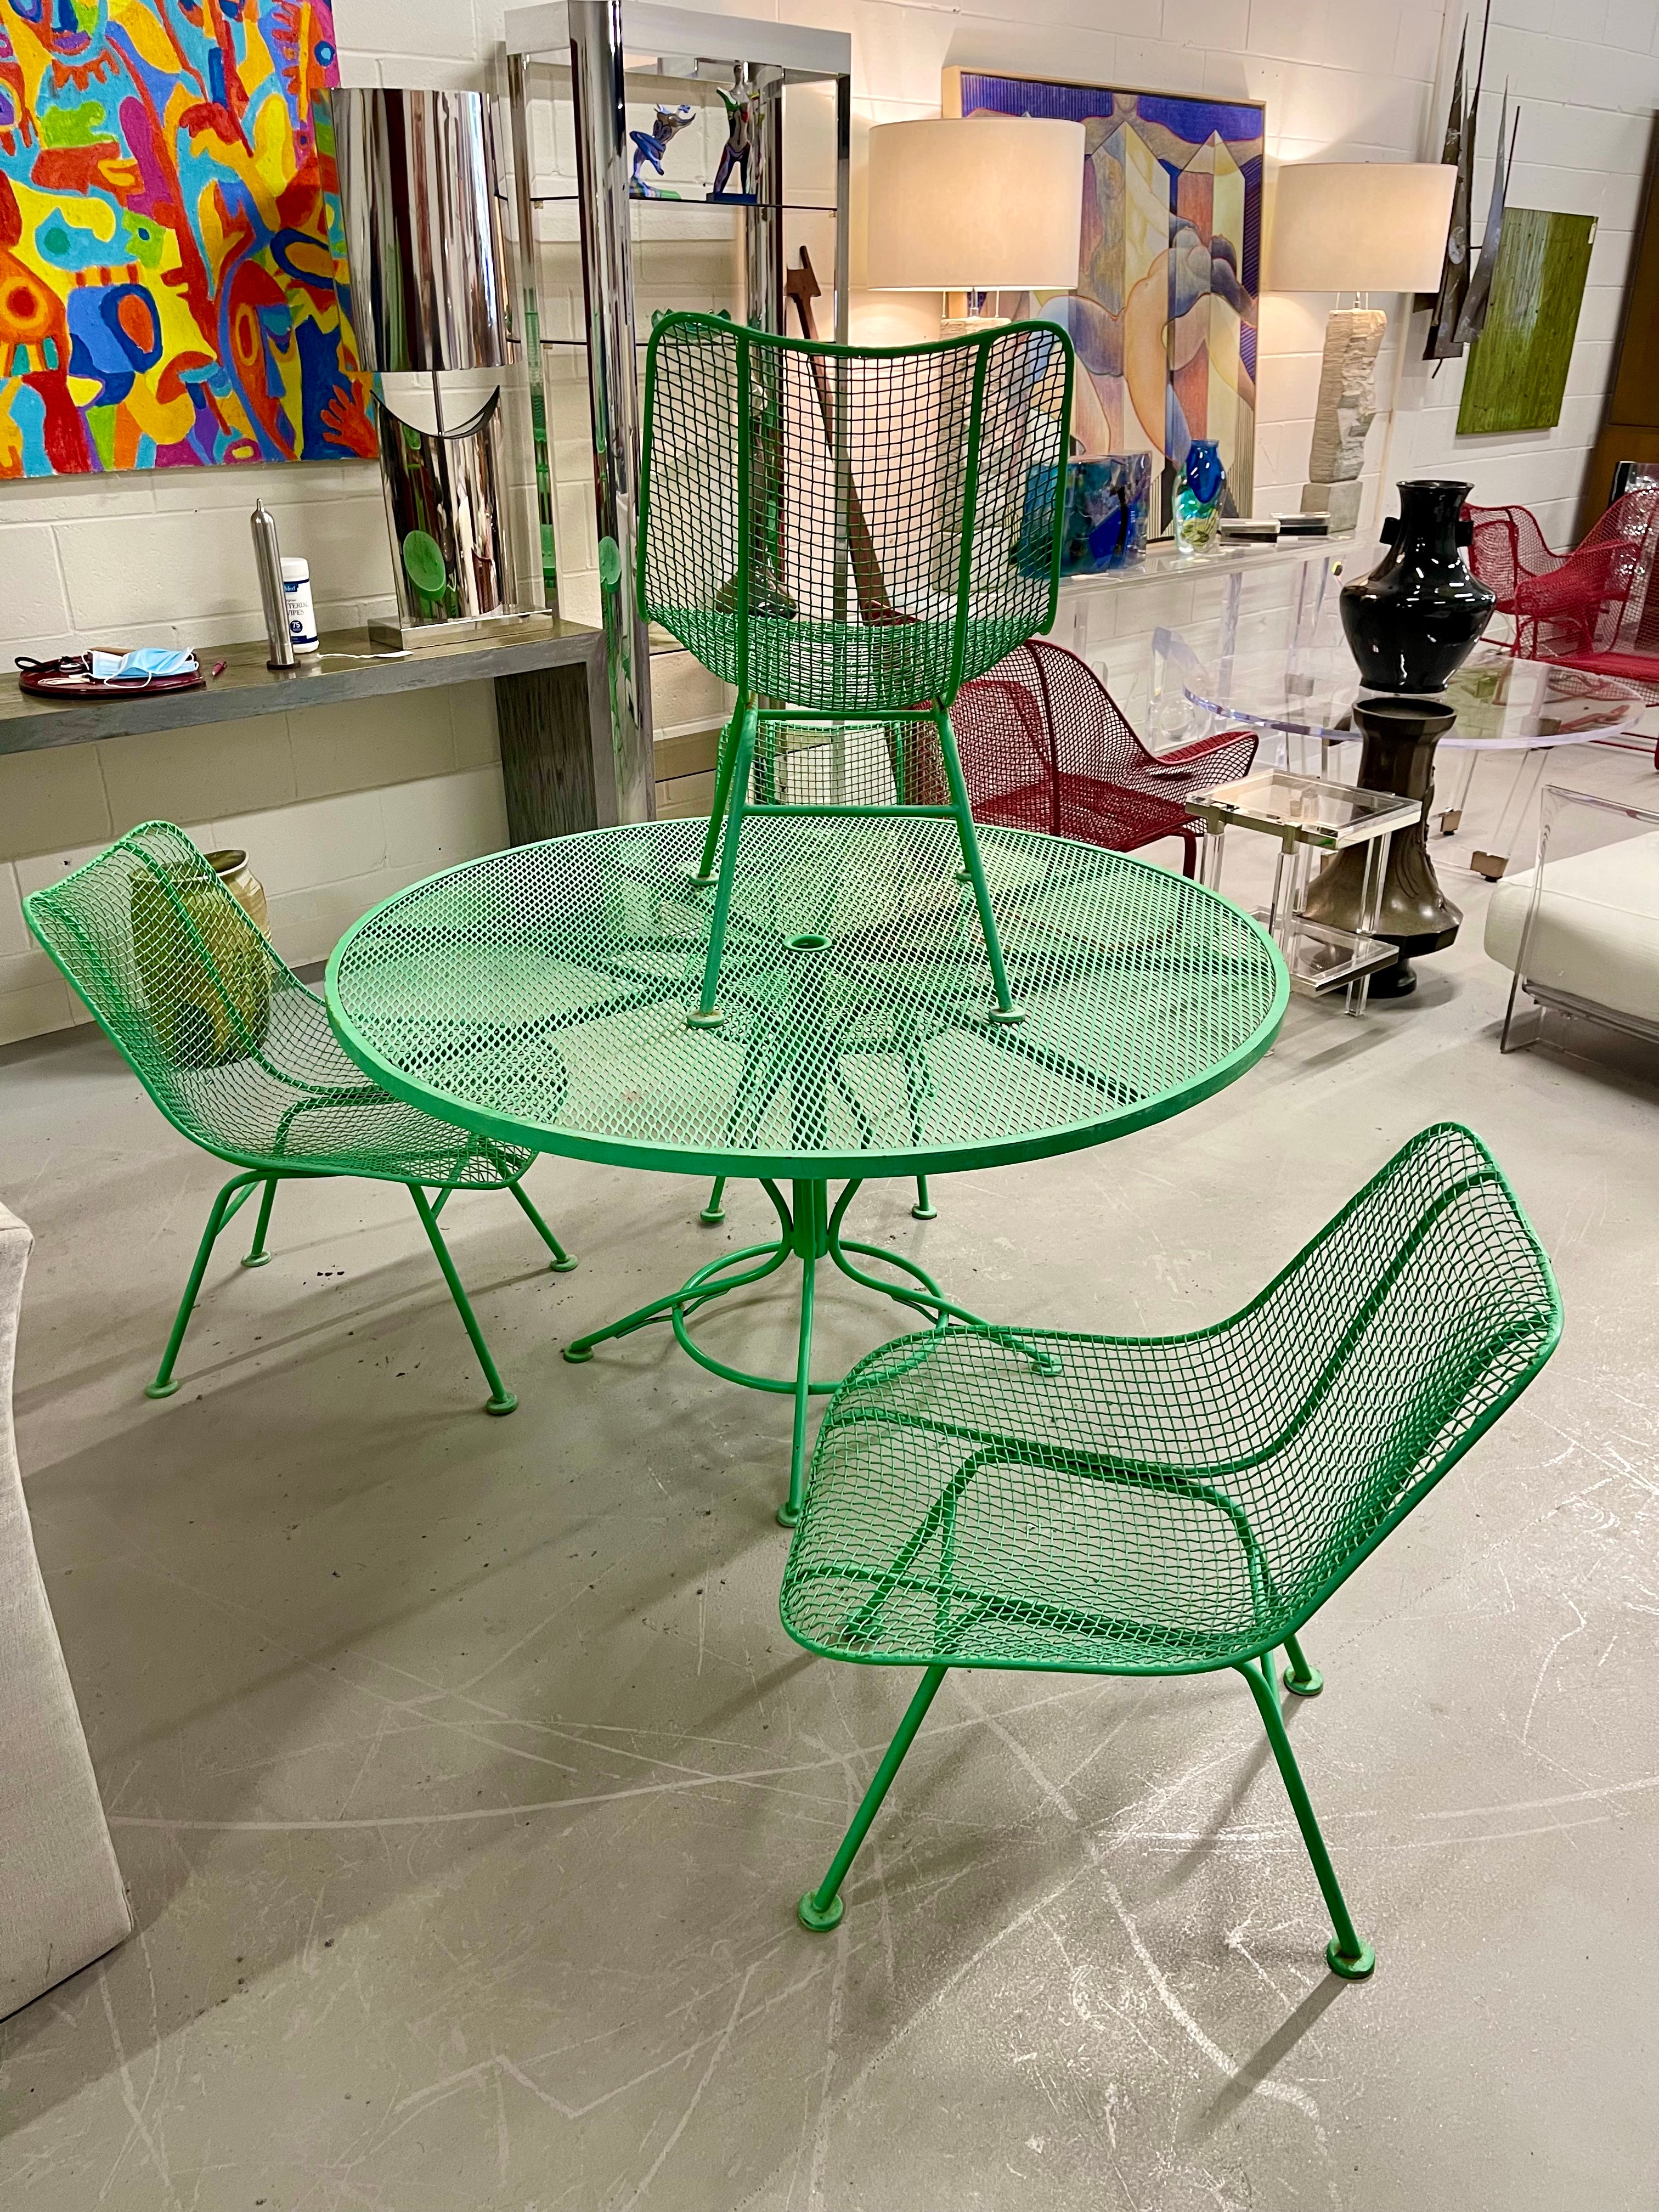 Nice vintage Russell Woodard Sculptura dining set in a green color. 4 chairs and a table. Good condition with some paint chips and wear from use. Table is 47 1/4 inches in diameter and 25.75 inches tall. Chair set's height is 14 1/2 inches. Chair